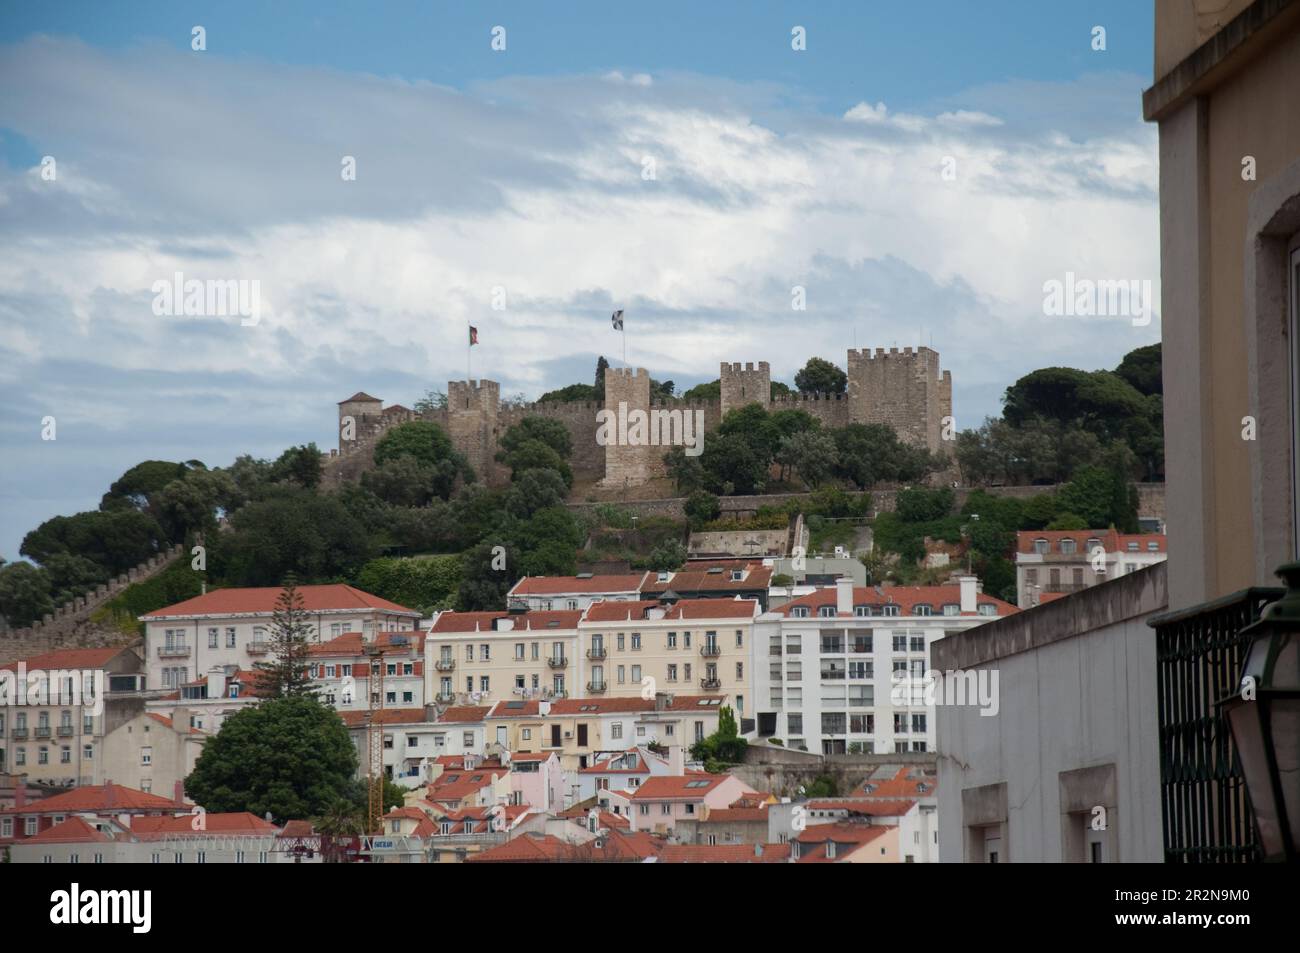 St George's Castle and Lisbon rooftops, Lisbon, Portugal Stock Photo